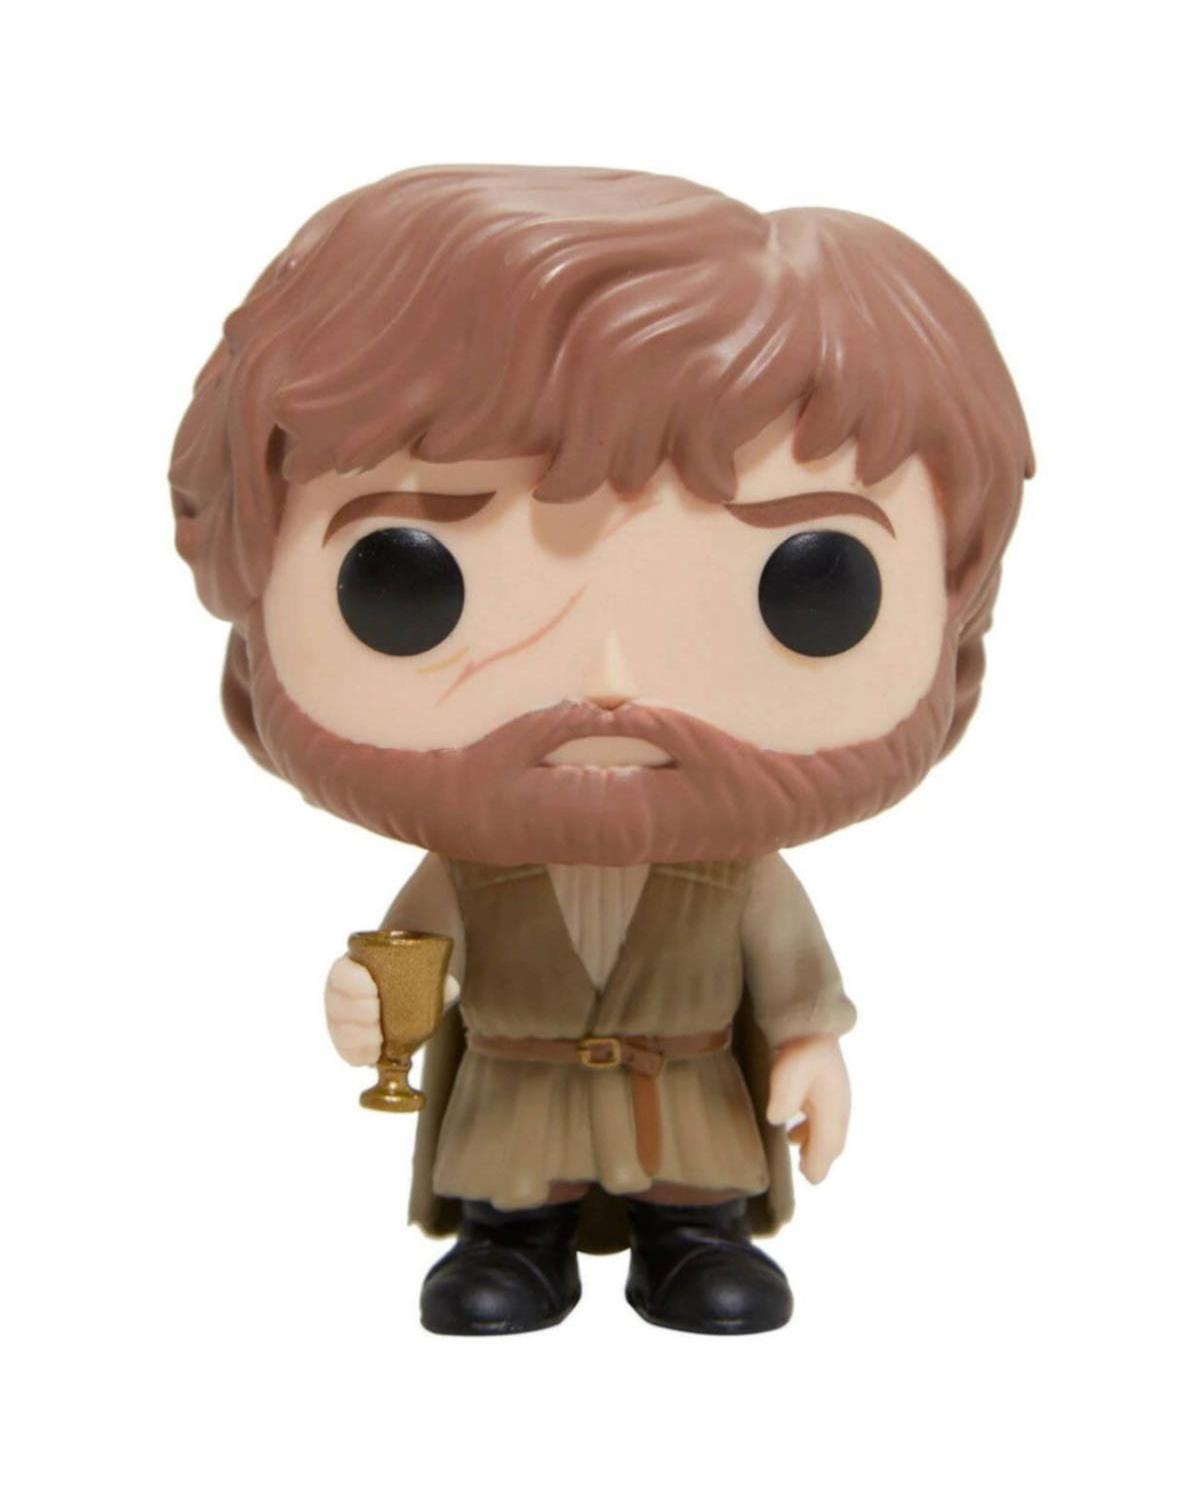 POP! GAME OF THRONES - TYRION LANNISTER #50 - FUNKO